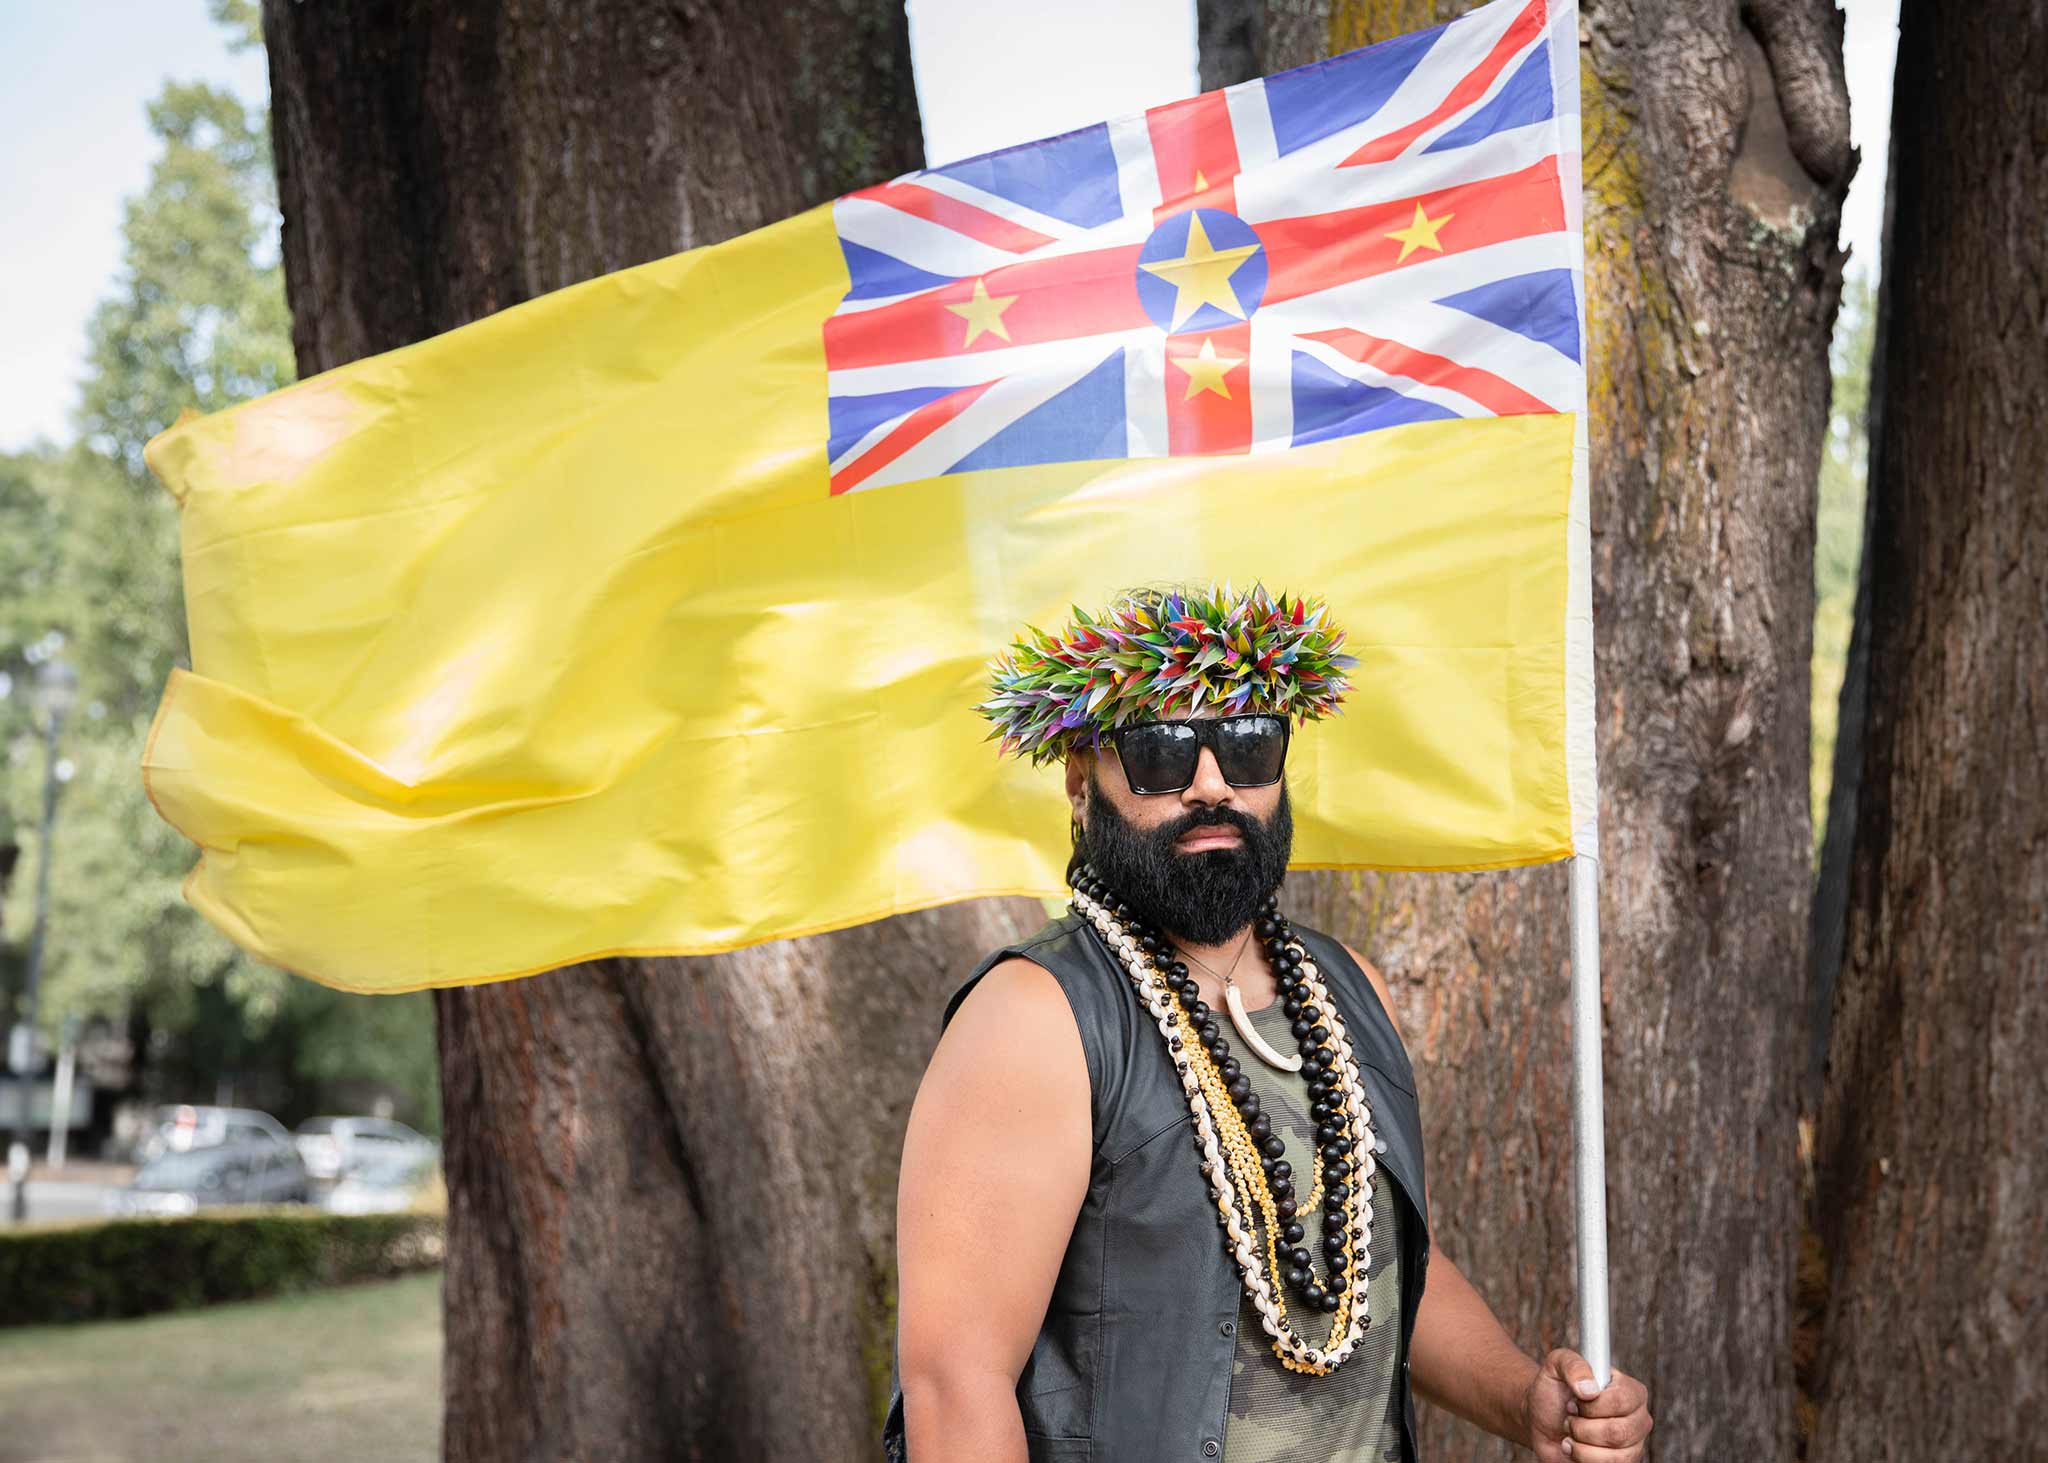 Photo of a man holding a flag in front of a tree.